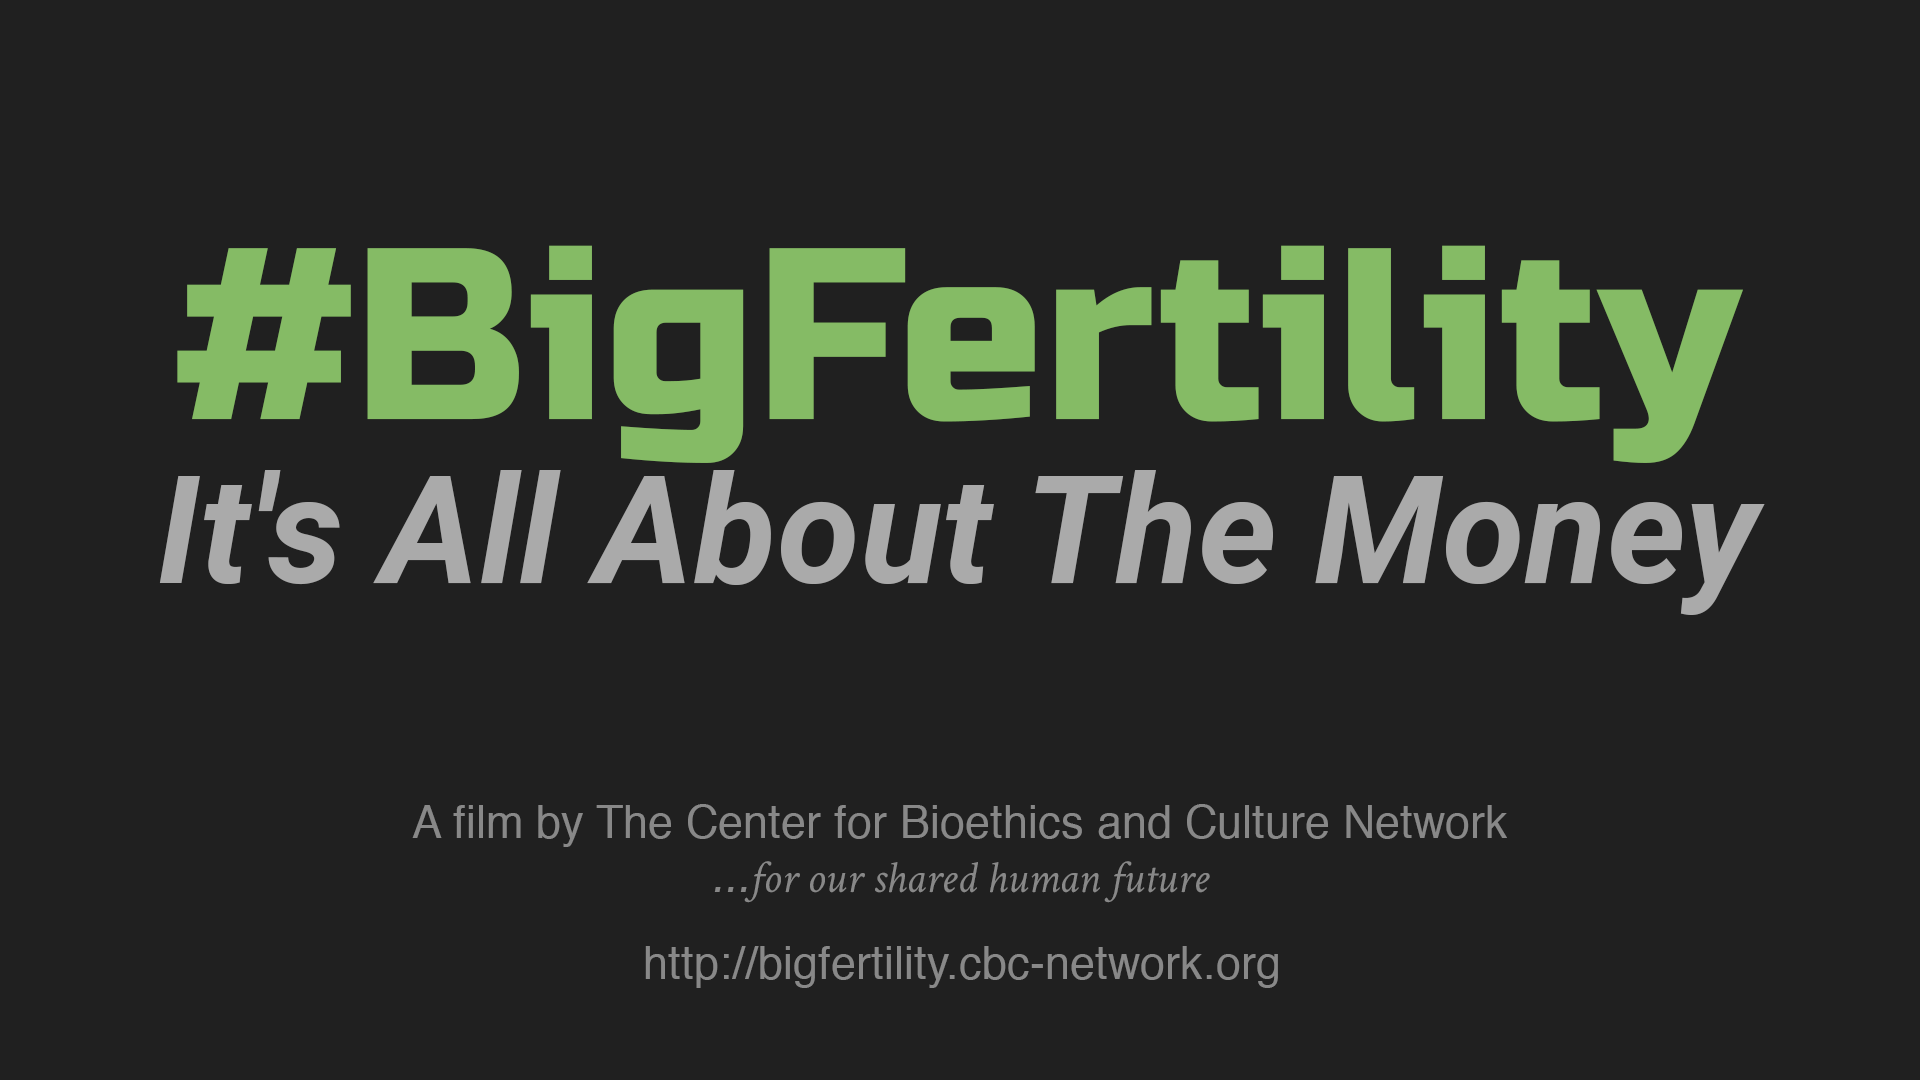 THE CENTER FOR BIOETHICS AND CULTURE PRODUCED THE DOCUMENTARY “#BigFertility” 2018 — Kelly’s story exemplifies everything that is wrong with the distorted version of fertility medicine that is #BigFertility. It truly is all about the money…